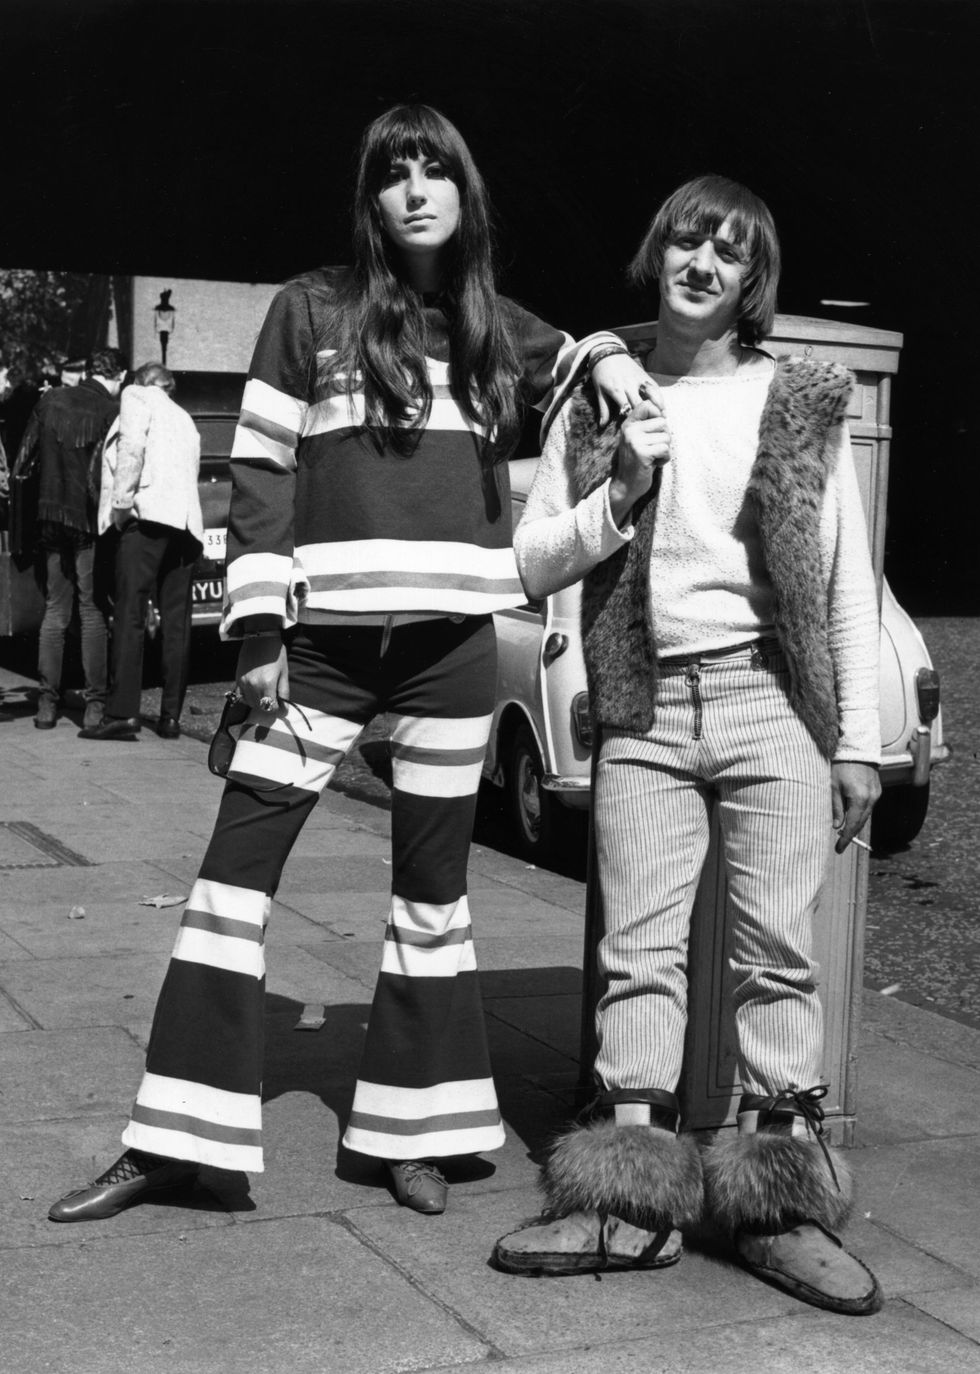 Sonny and Cher in Northumberland Avenue, London after making a recording for the BBC at the Playhouse Theatre